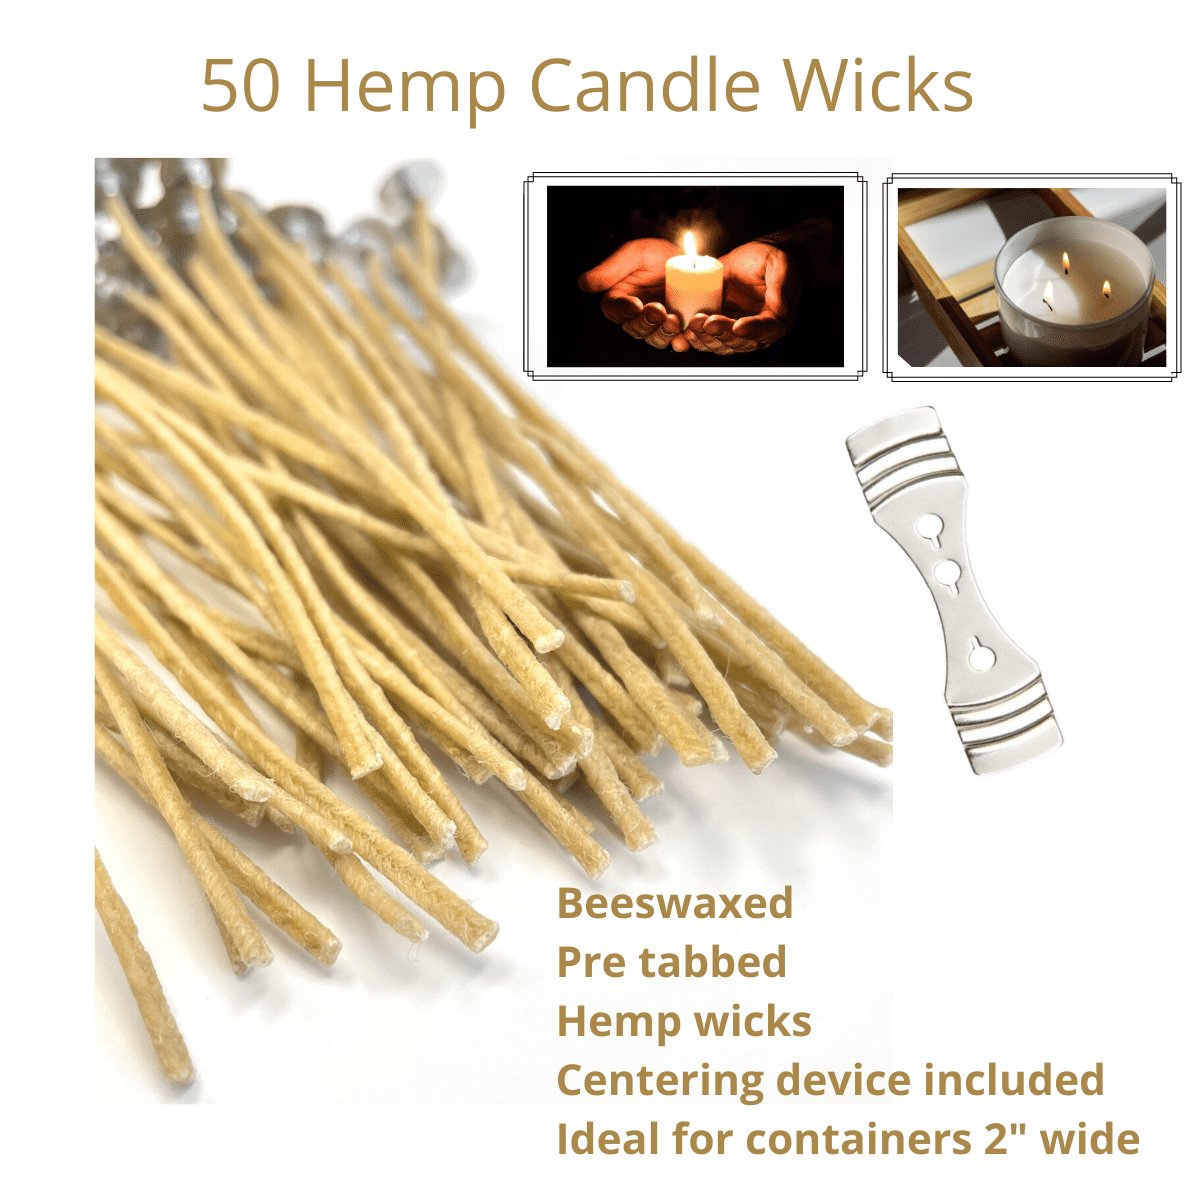 EricX Light Organic Hemp Candle Wicks, 100 Piece 8 Pre-Waxed by 100%  Beeswax & Tabbed, for Candle Making